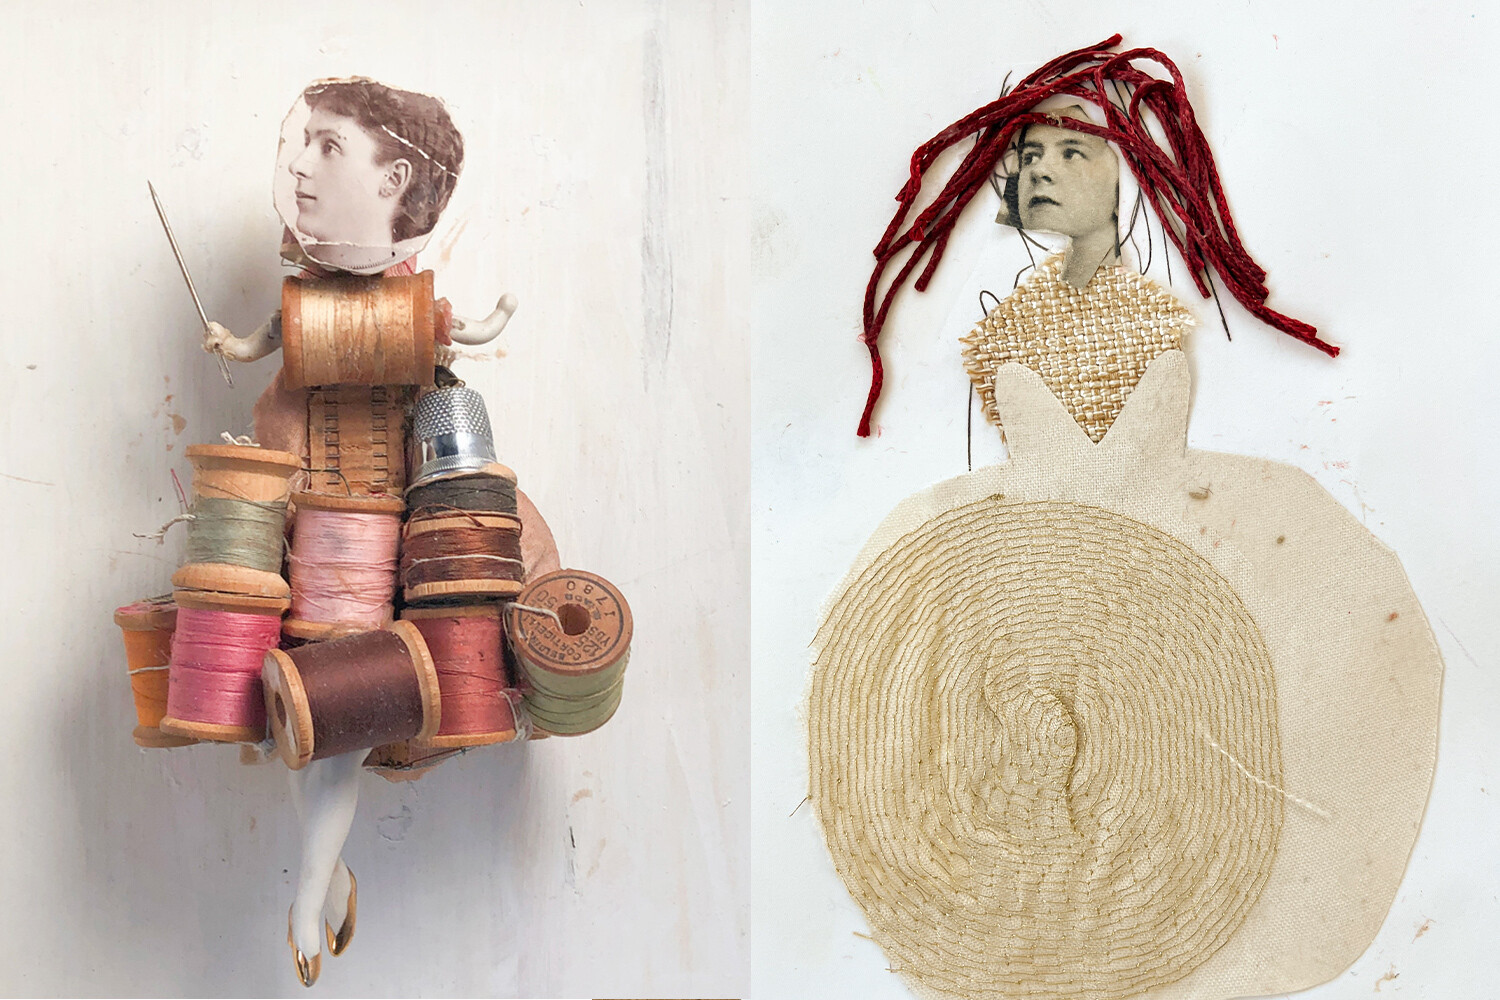 Two mixed media creations from noted illustrator/artist Polly Becker